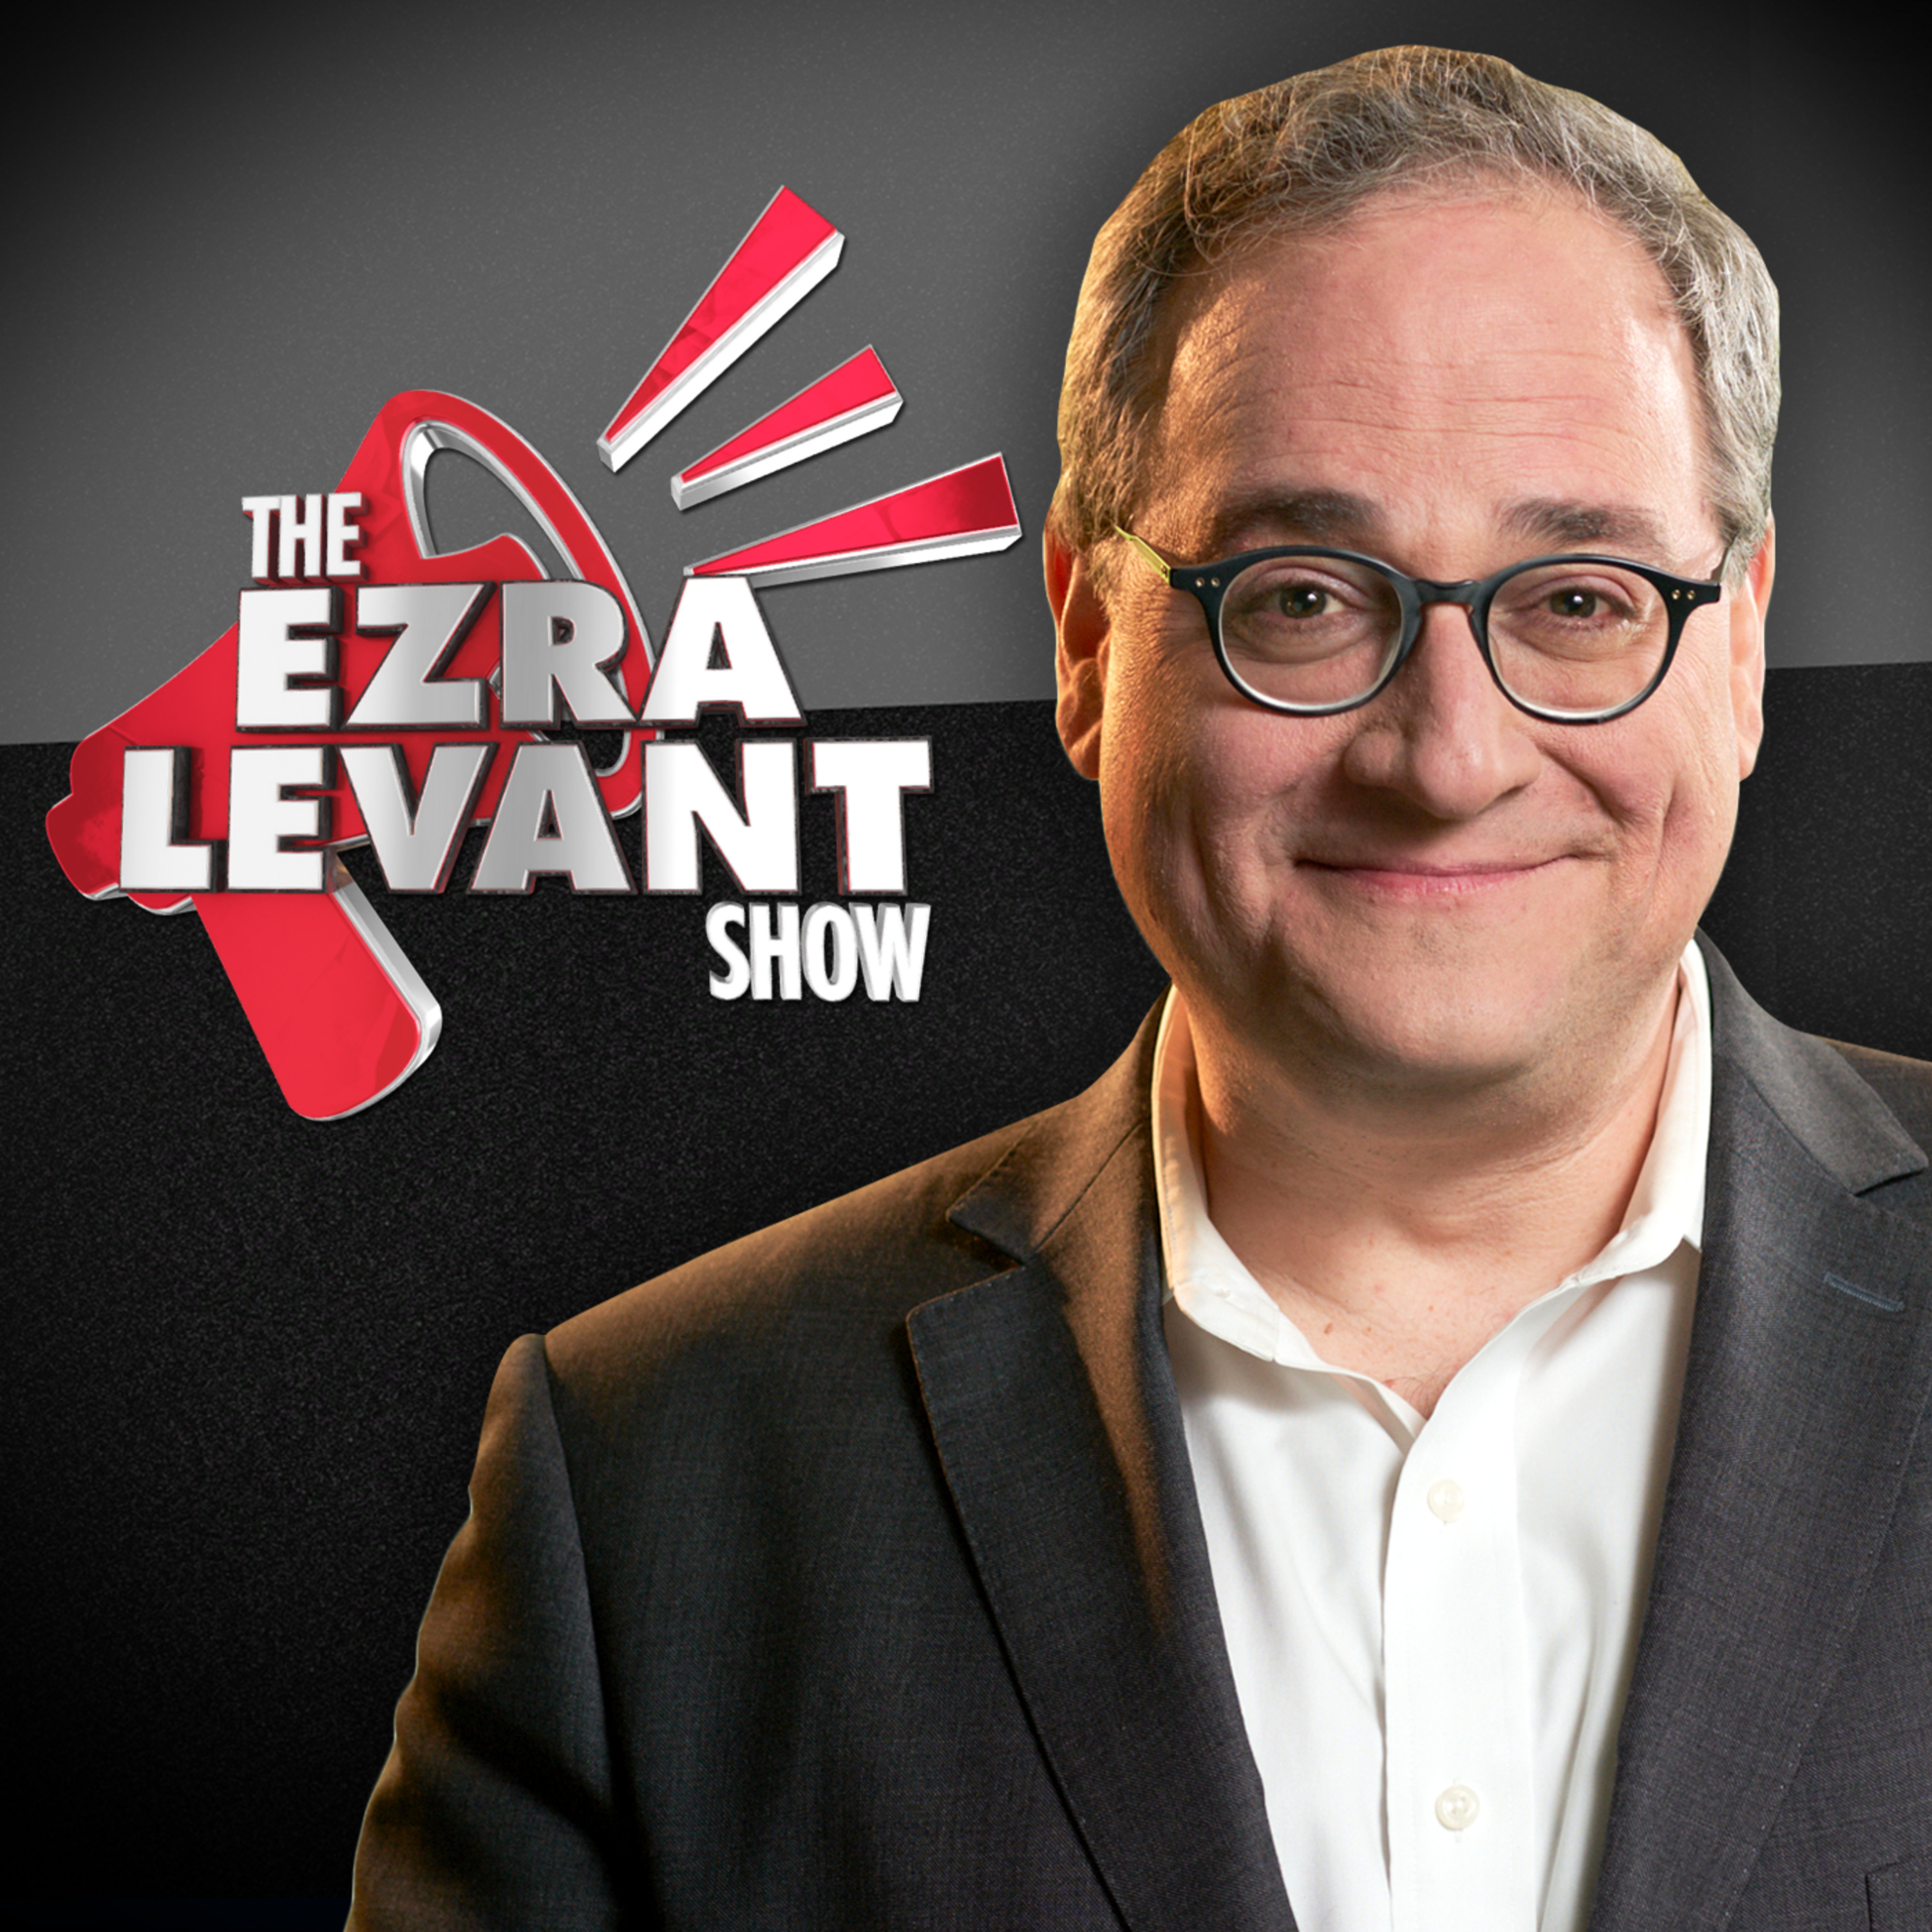 EZRA LEVANT | Here comes the rematch in the battle between Trudeau and the truckers